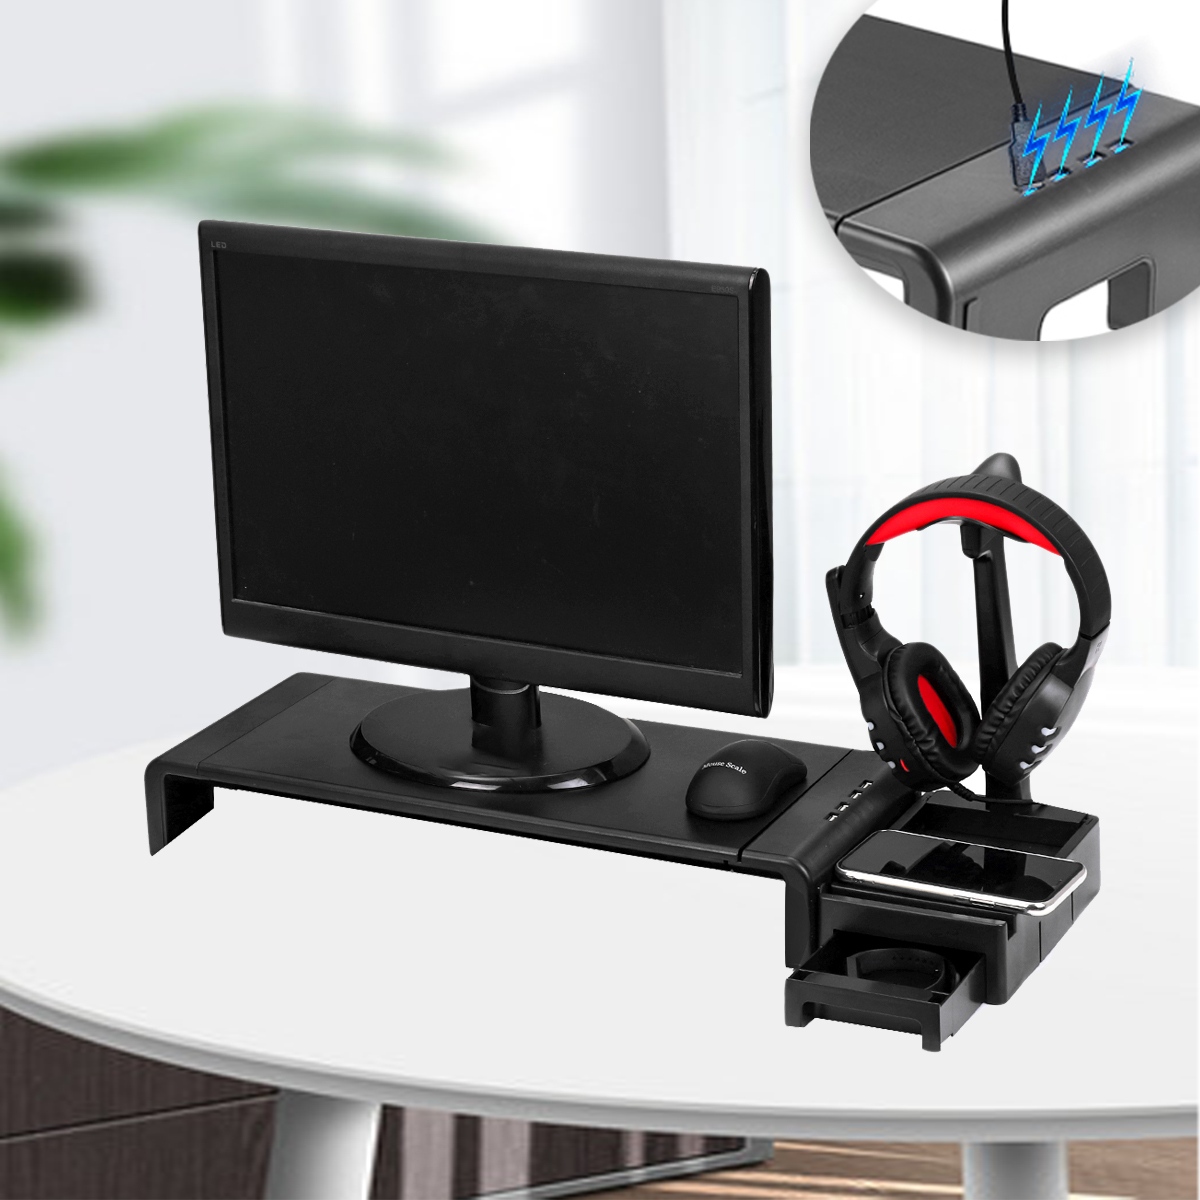 Laptop-Monitor-Stand-Computer-Riser-Monitor-Desktop-Stand-Riser-Foldable-with-USB-Charging-Storage-D-1909347-9